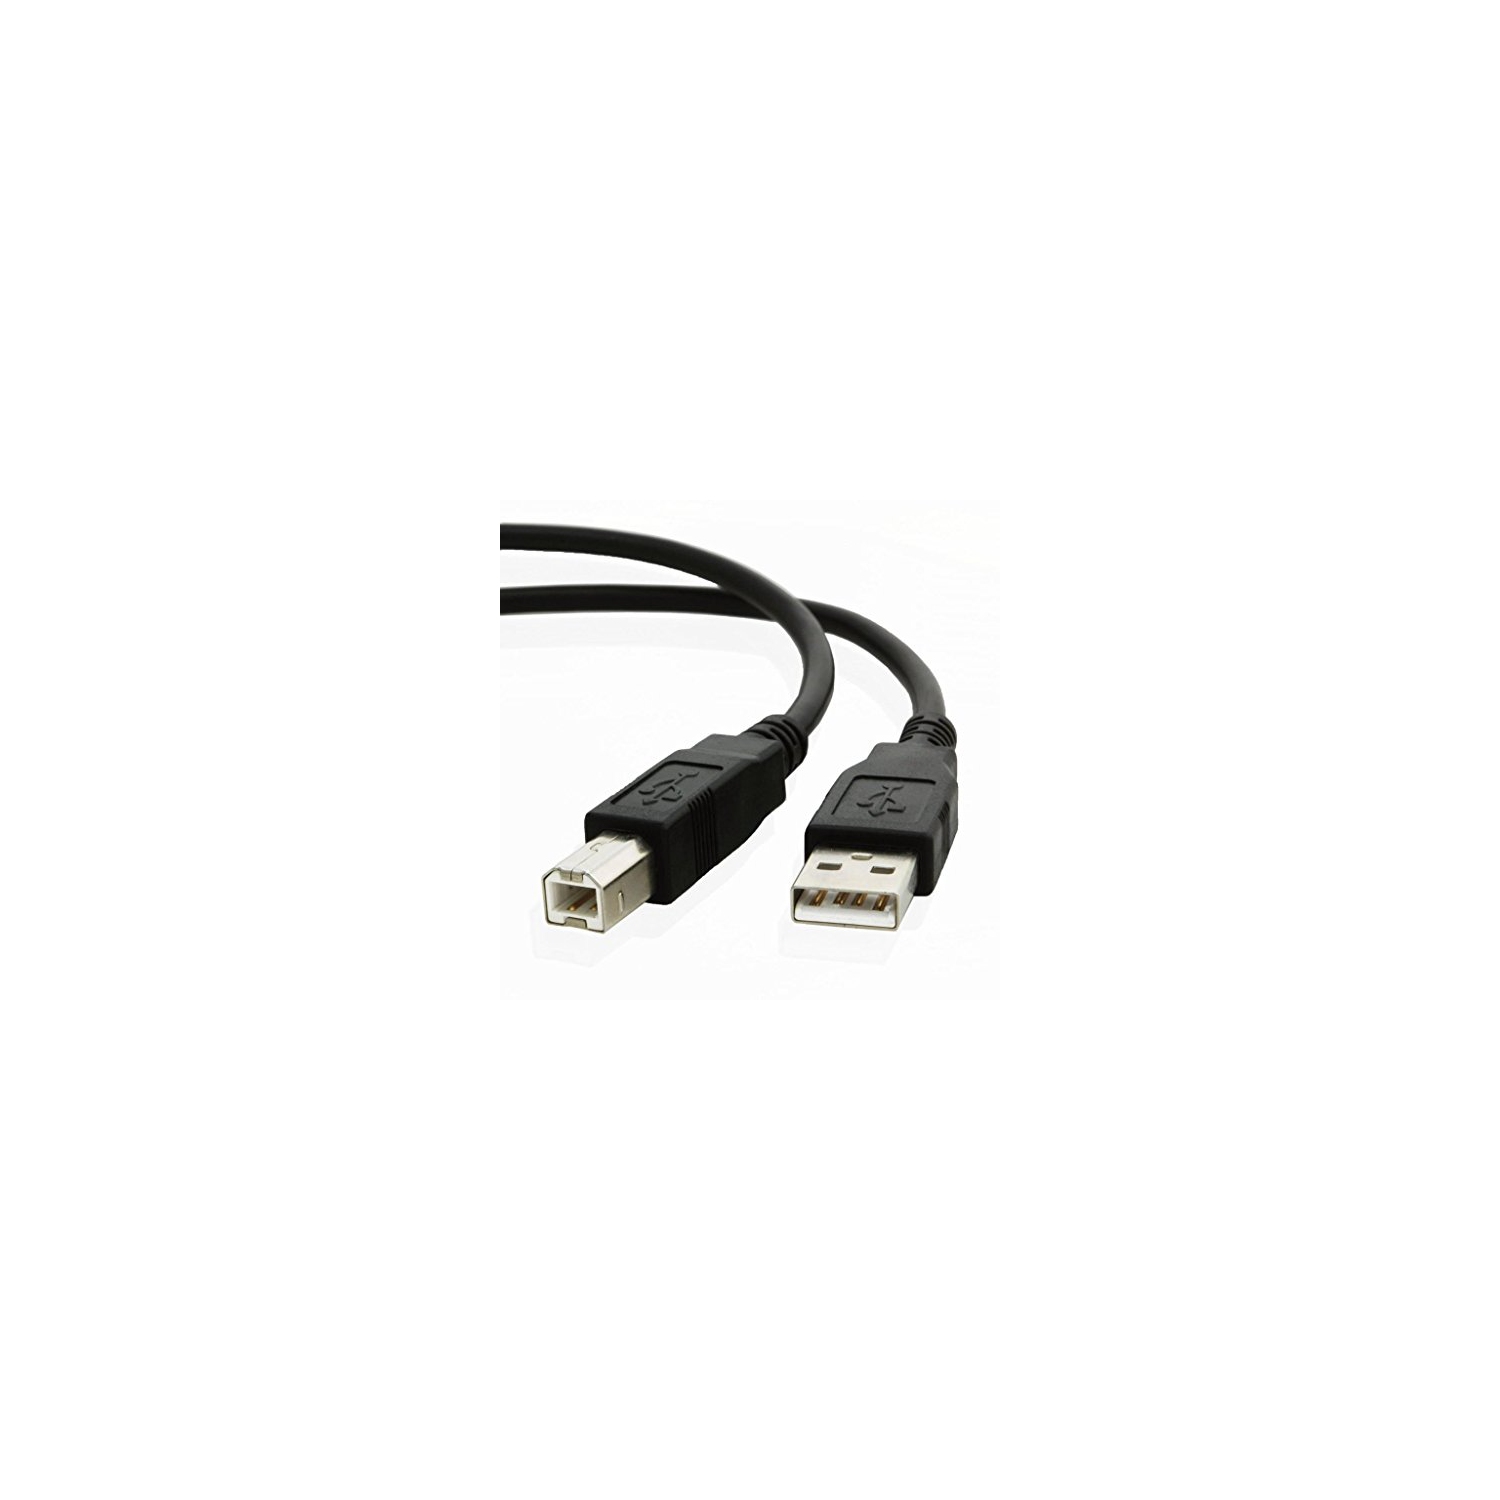 10ft USB PC Cord for Bose Companion 3 Series II or 5 2.1 Multimedia Computer Speakers